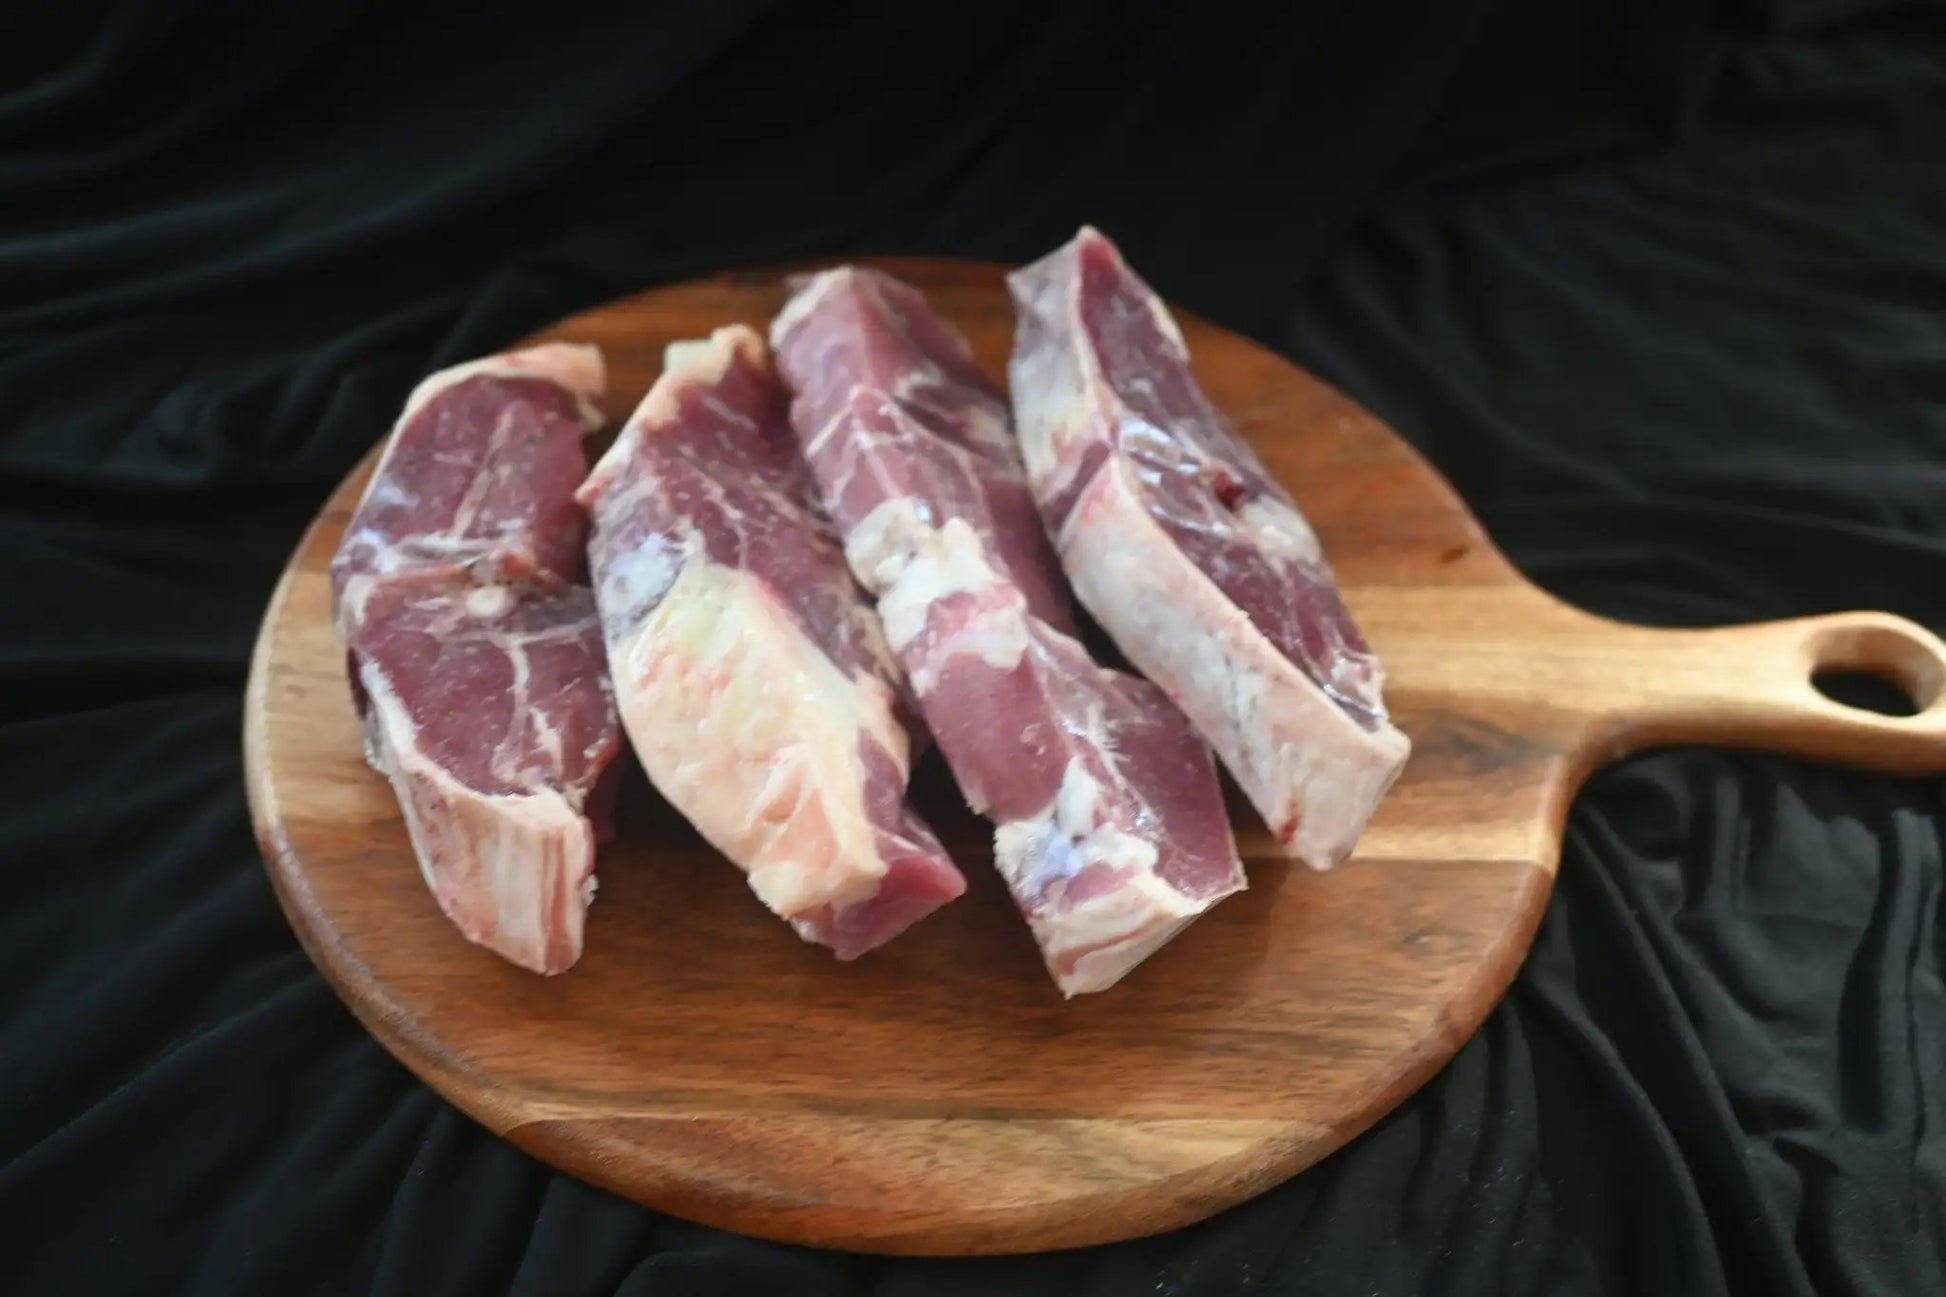 Grass-fed Icelandic Lamb Loin Steaks (4 Count) - The Hufeisen-Ranch (WYO Wagyu)